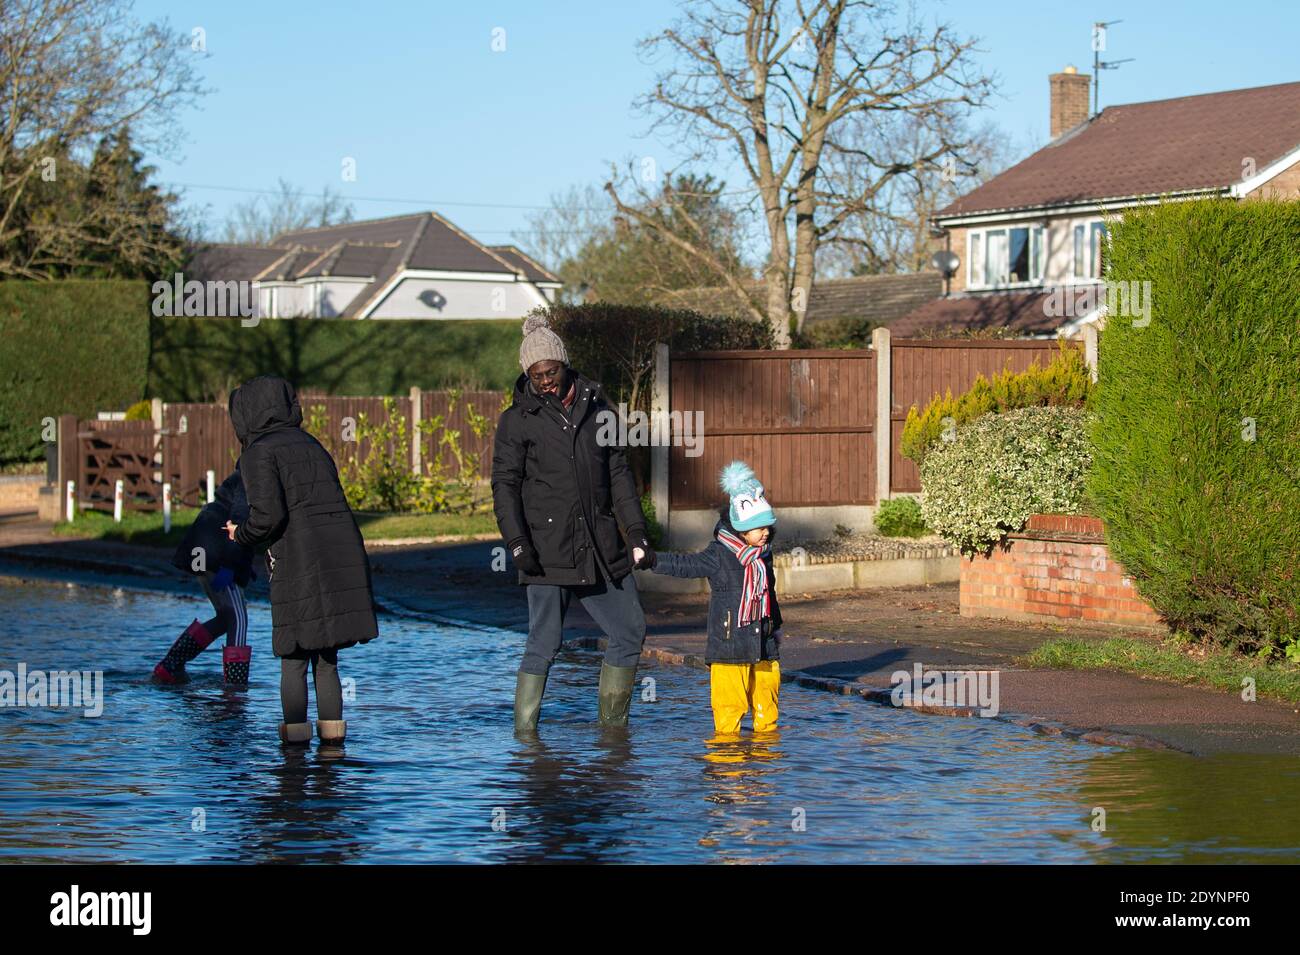 Flooding in Great Barford in Bedfordshire, after residents living near the River Great Ouse in north Bedfordshire were 'strongly urged' to seek alternative accommodation due to fears of flooding. Stock Photo